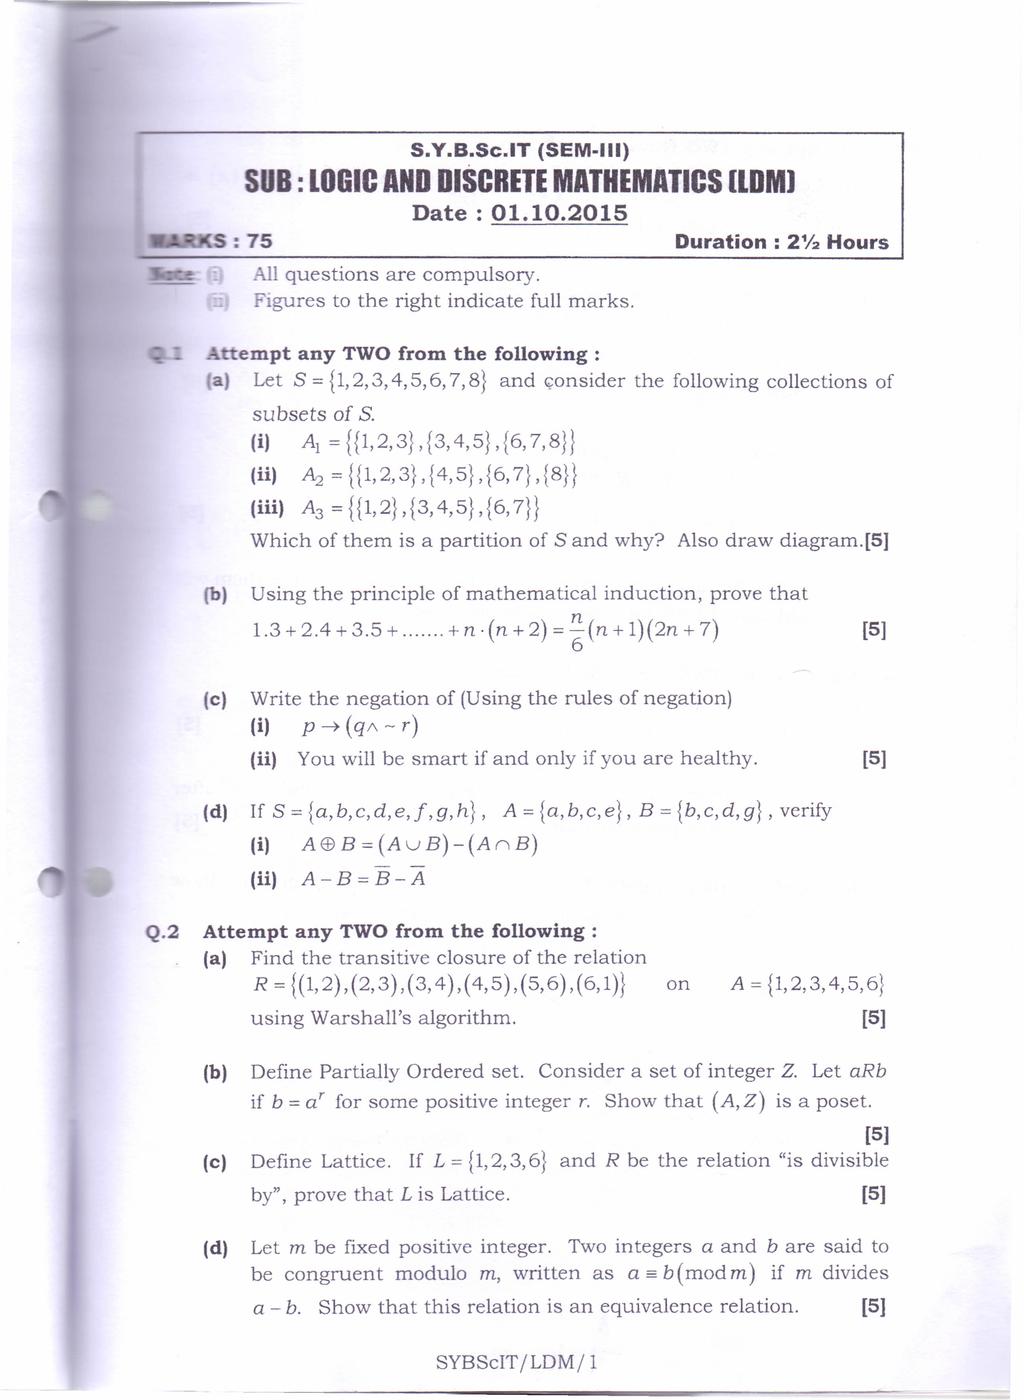 S.Y.B.Se.IT (SEM III) B : logic ANO DISCRETE MATHEMATICS (lom) Date: 01.10.2015 _-\11questions are compulsory. igures to the right indicate full marks.